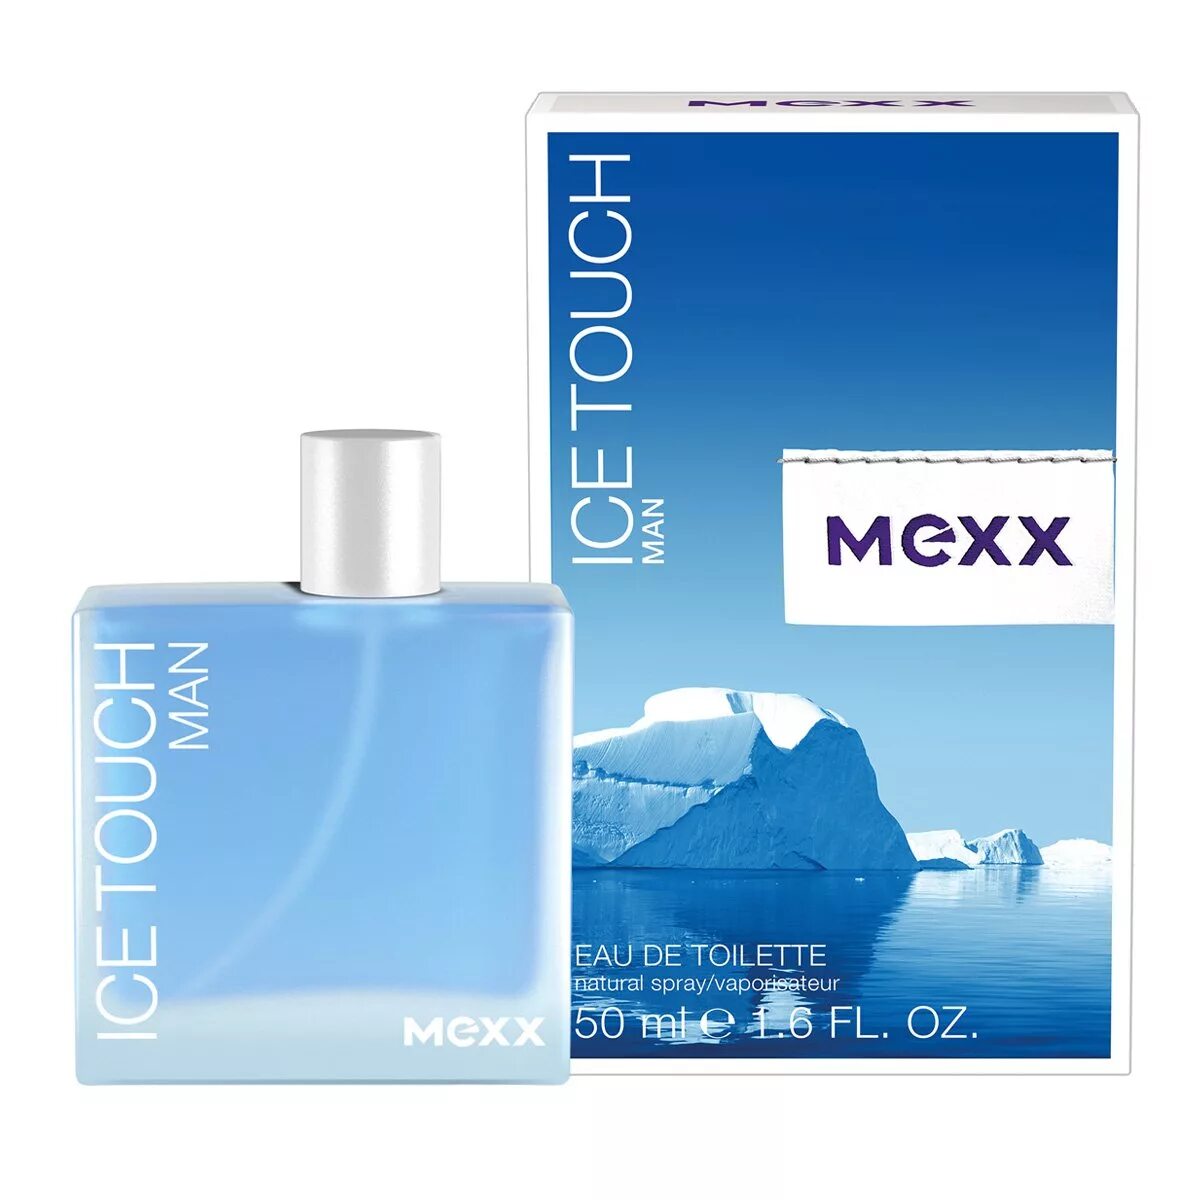 Mexx Ice Touch man 30 ml. Mexx Ice Touch. Духи Mexx Ice Touch. Духи Mexx Ice Touch man. Мужская туалетная вода минск